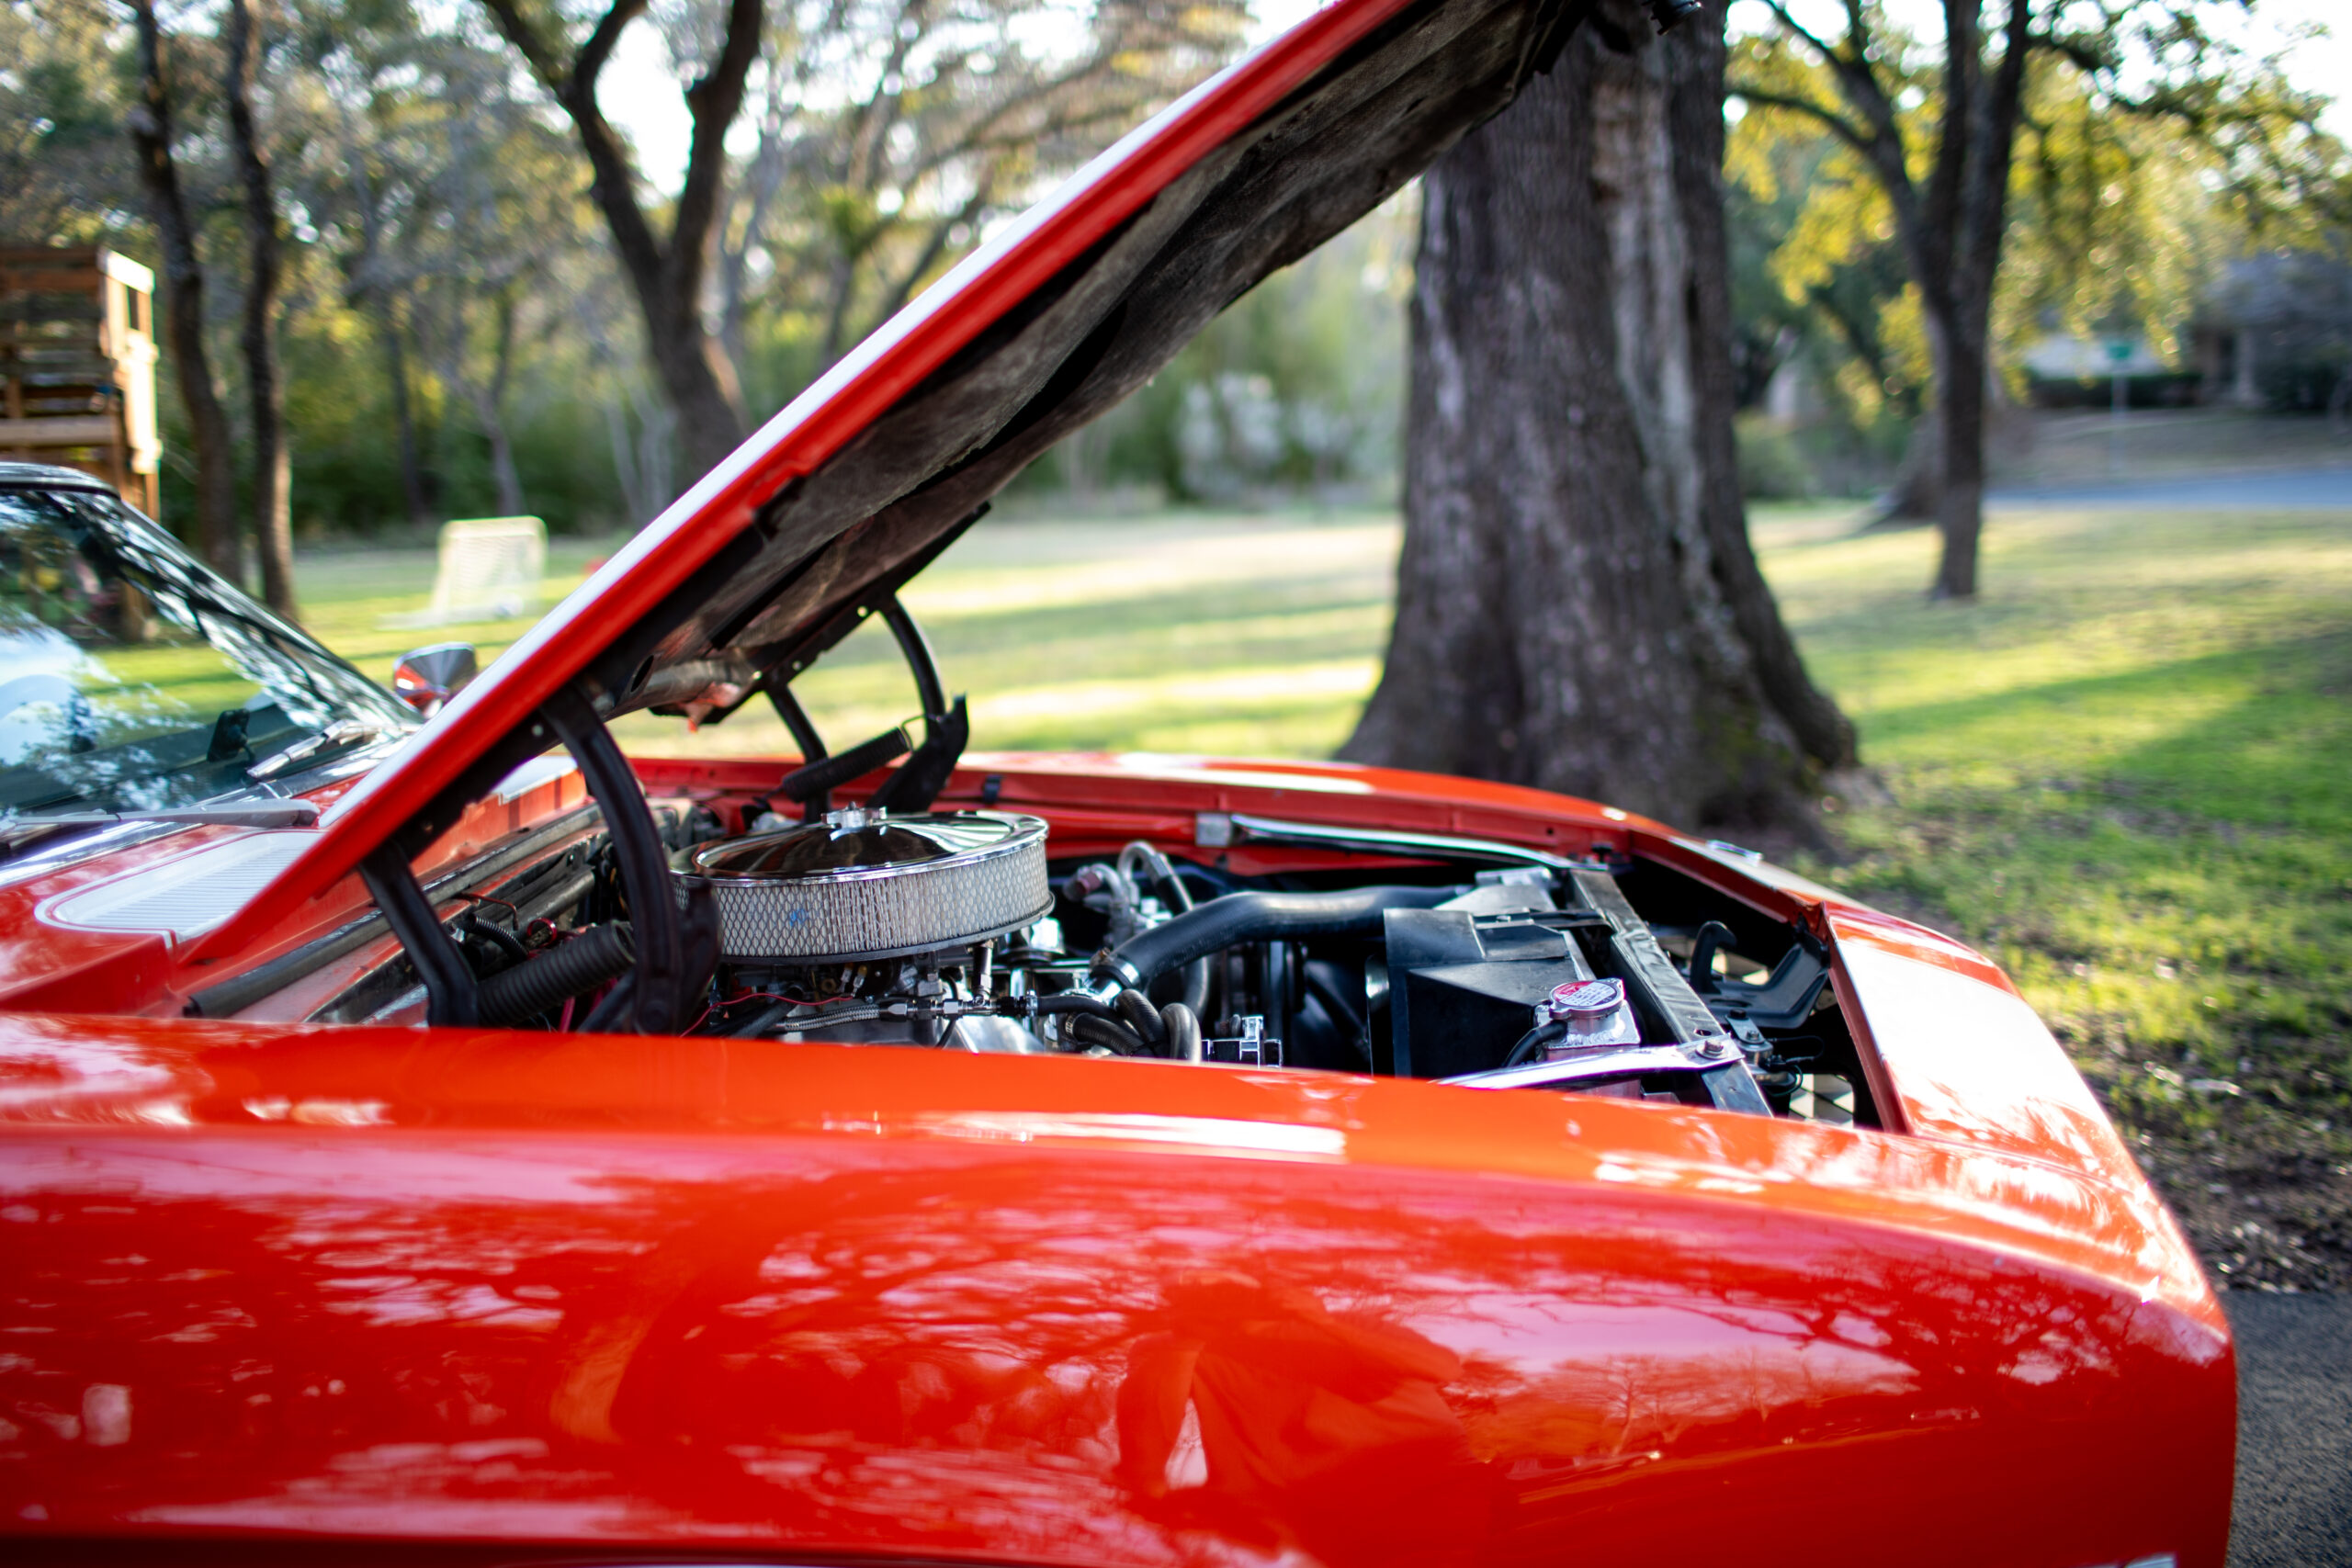 A red car with its hood open, revealing the engine and various mechanical components. The car is parked outdoors, surrounded by trees and greenery.